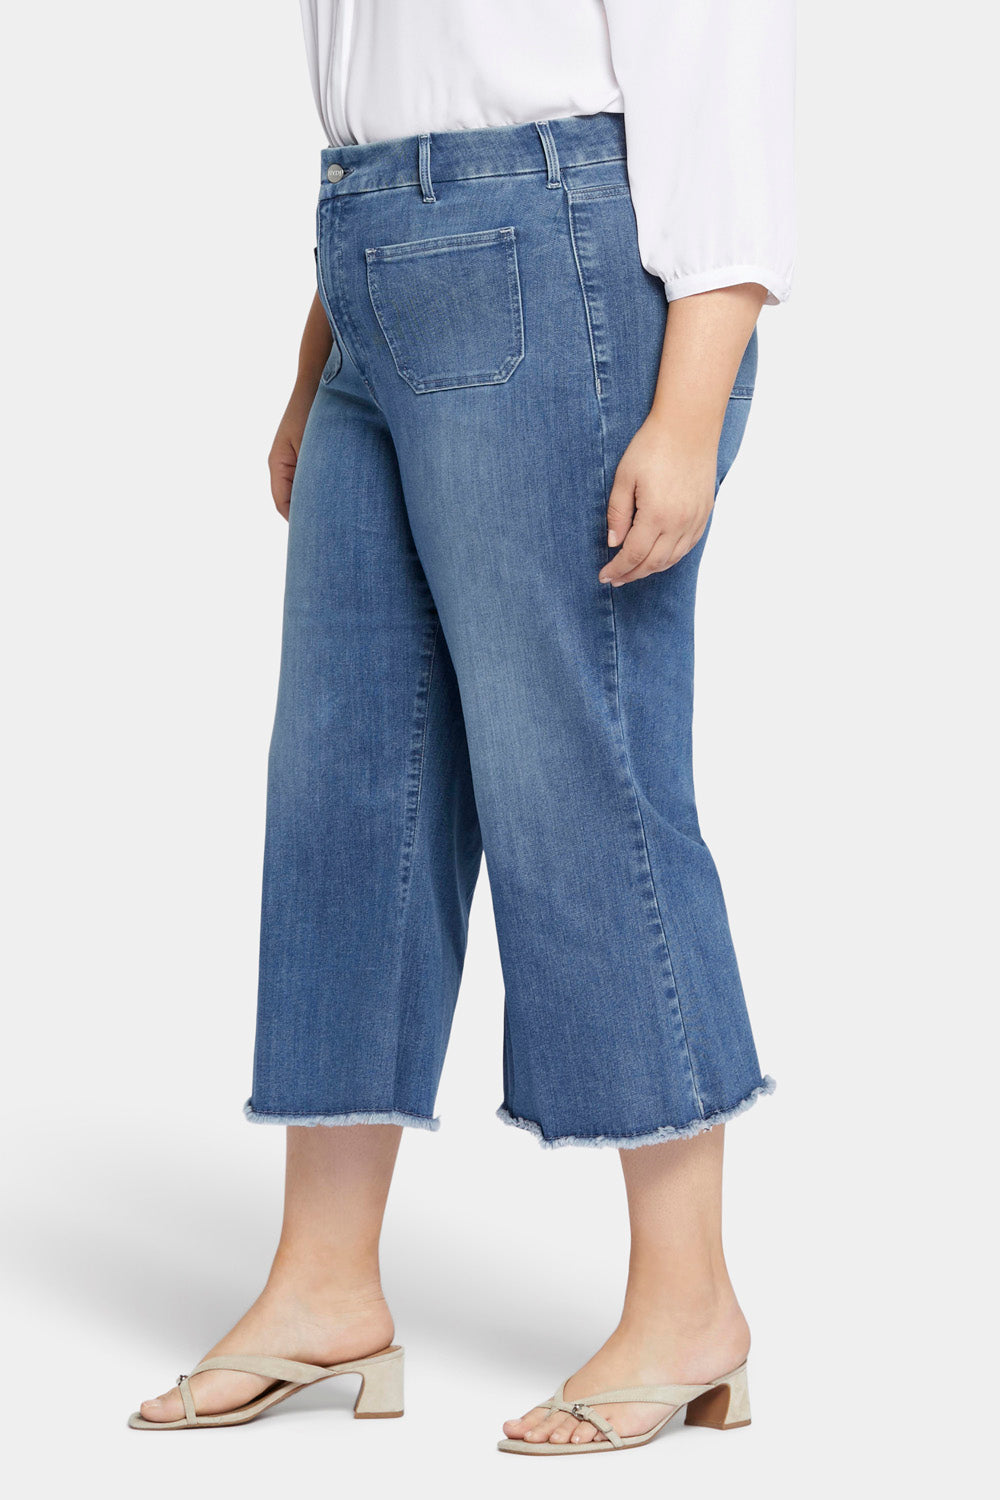 NYDJ Patchie Wide Leg Capri Jeans In Plus Size With Frayed Hems - Compass